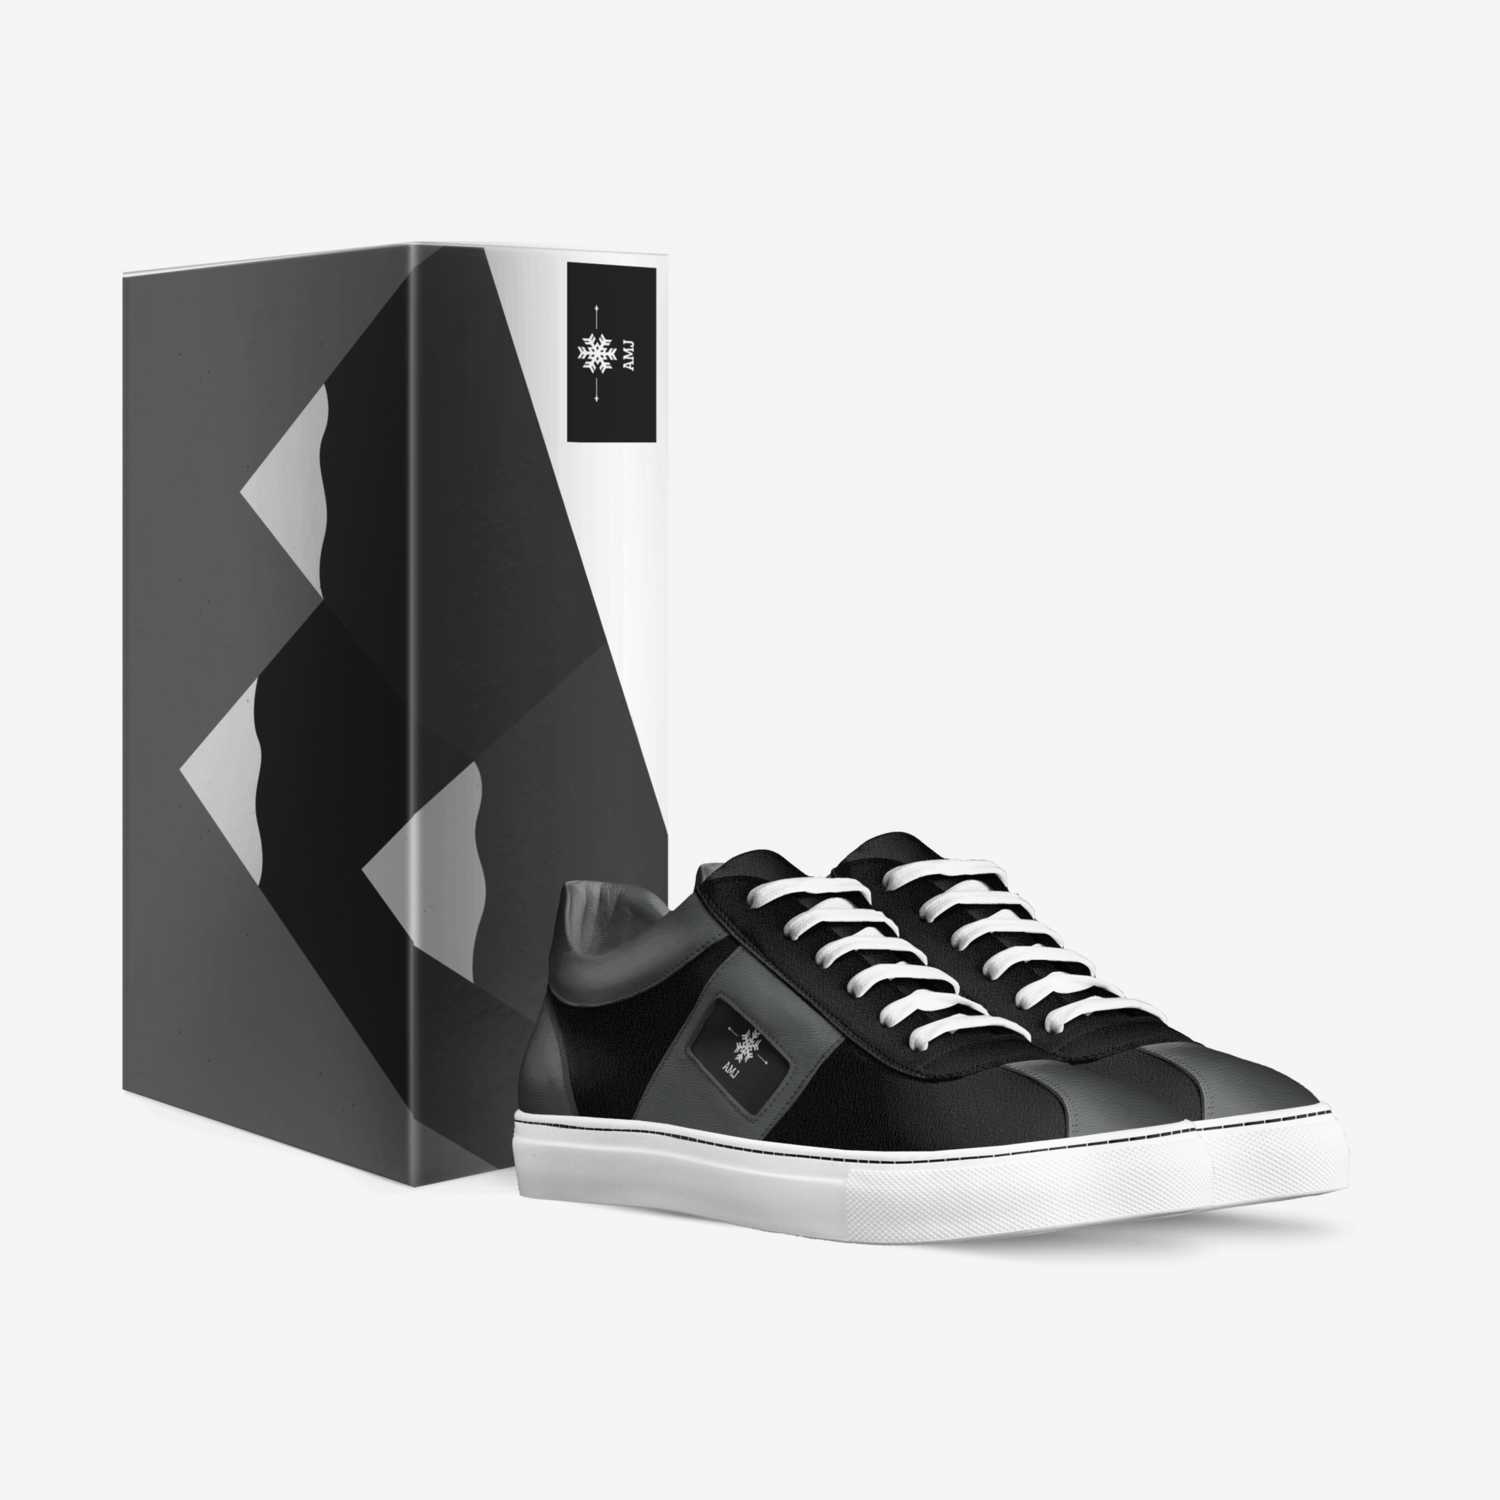 AMJ custom made in Italy shoes by Jaden Reichelt | Box view